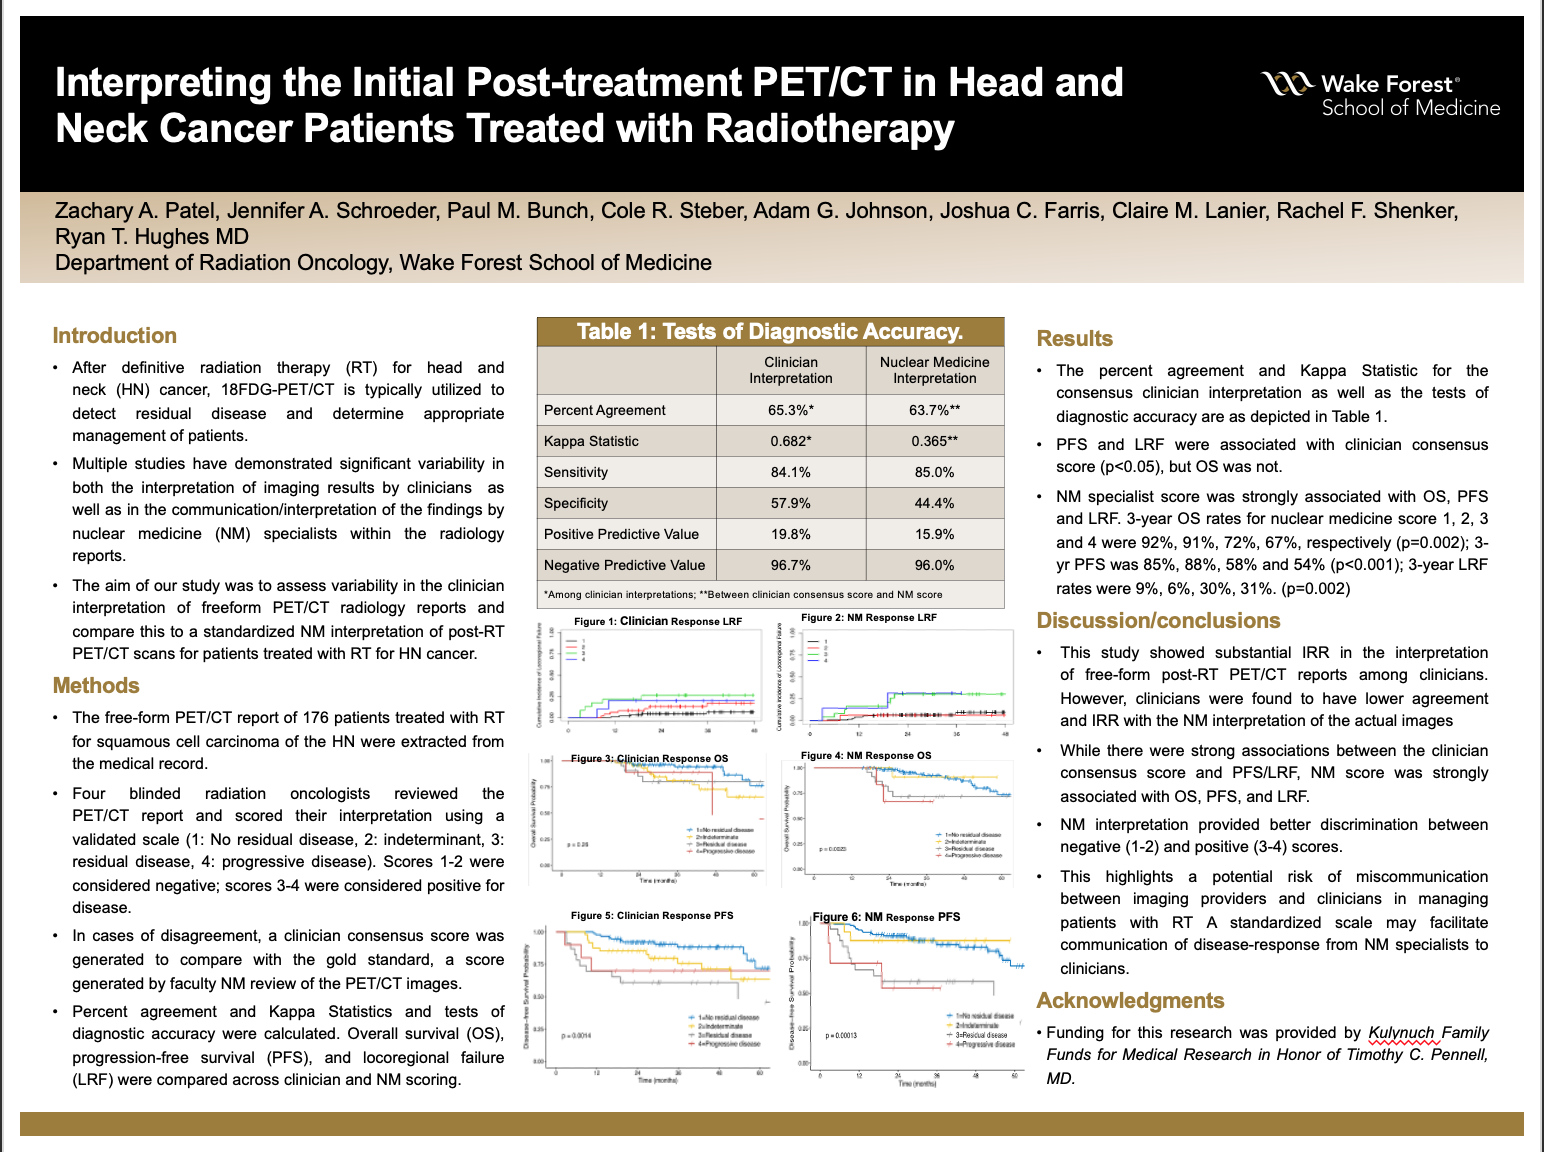 Showcase Image for Interpreting the Initial Post-treatment PET/CT in Head and Neck Cancer Patients Treated with Radiotherapy